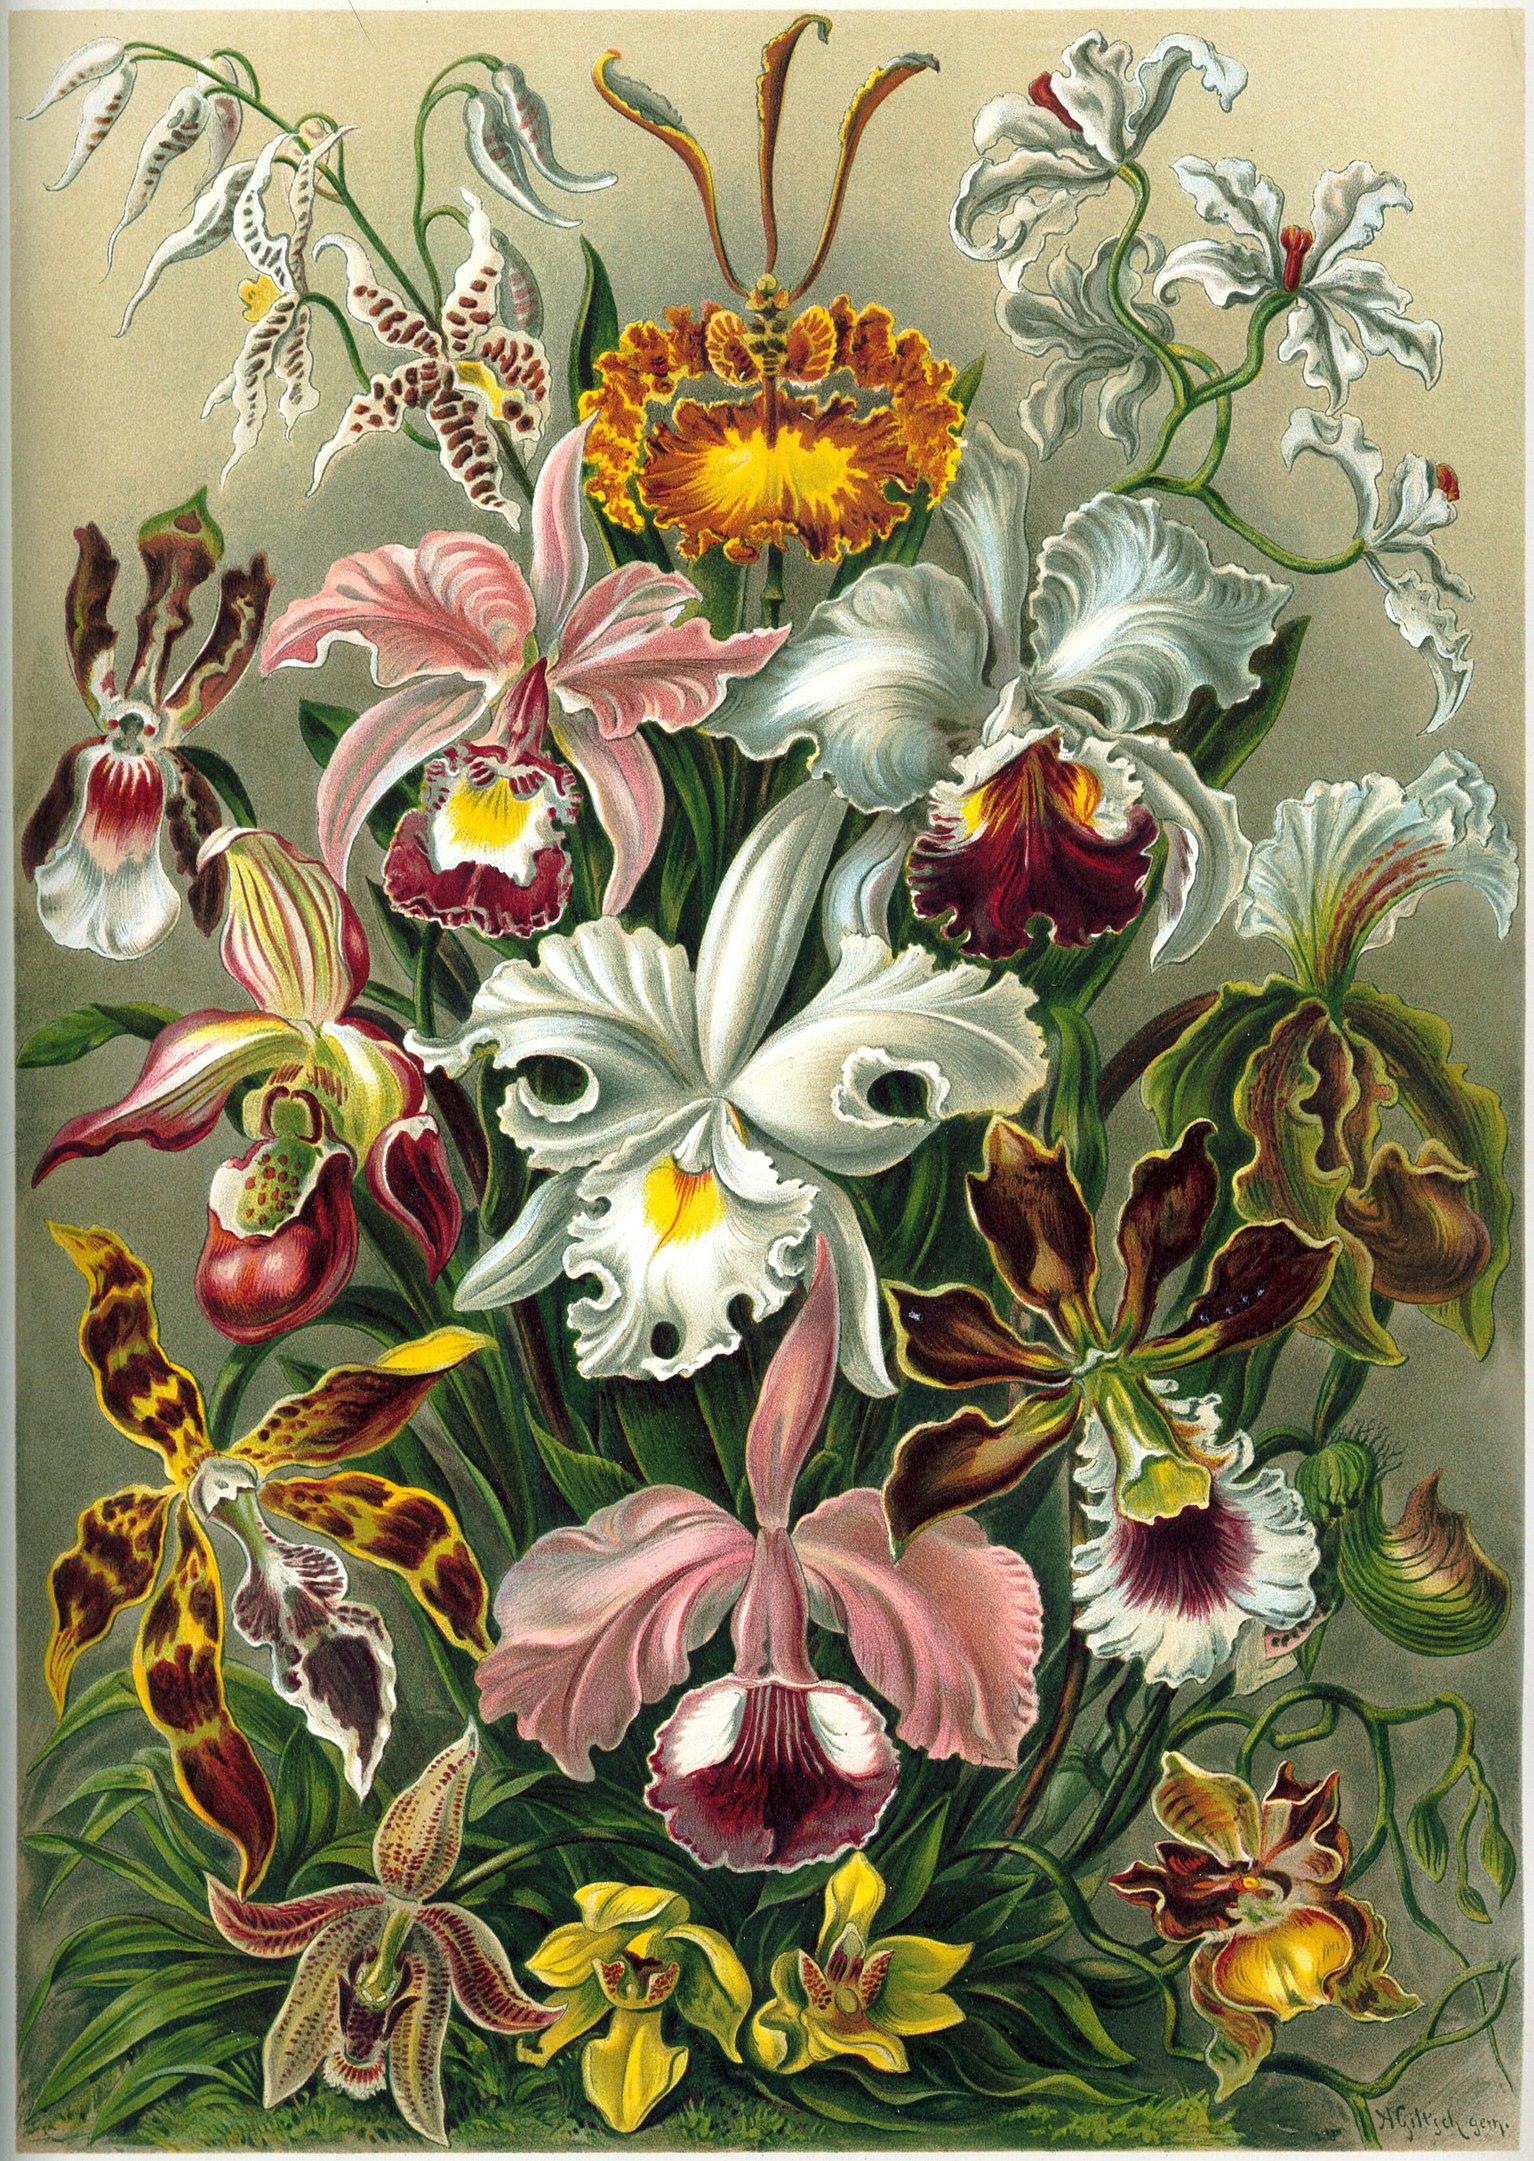 An illustration of various orchids